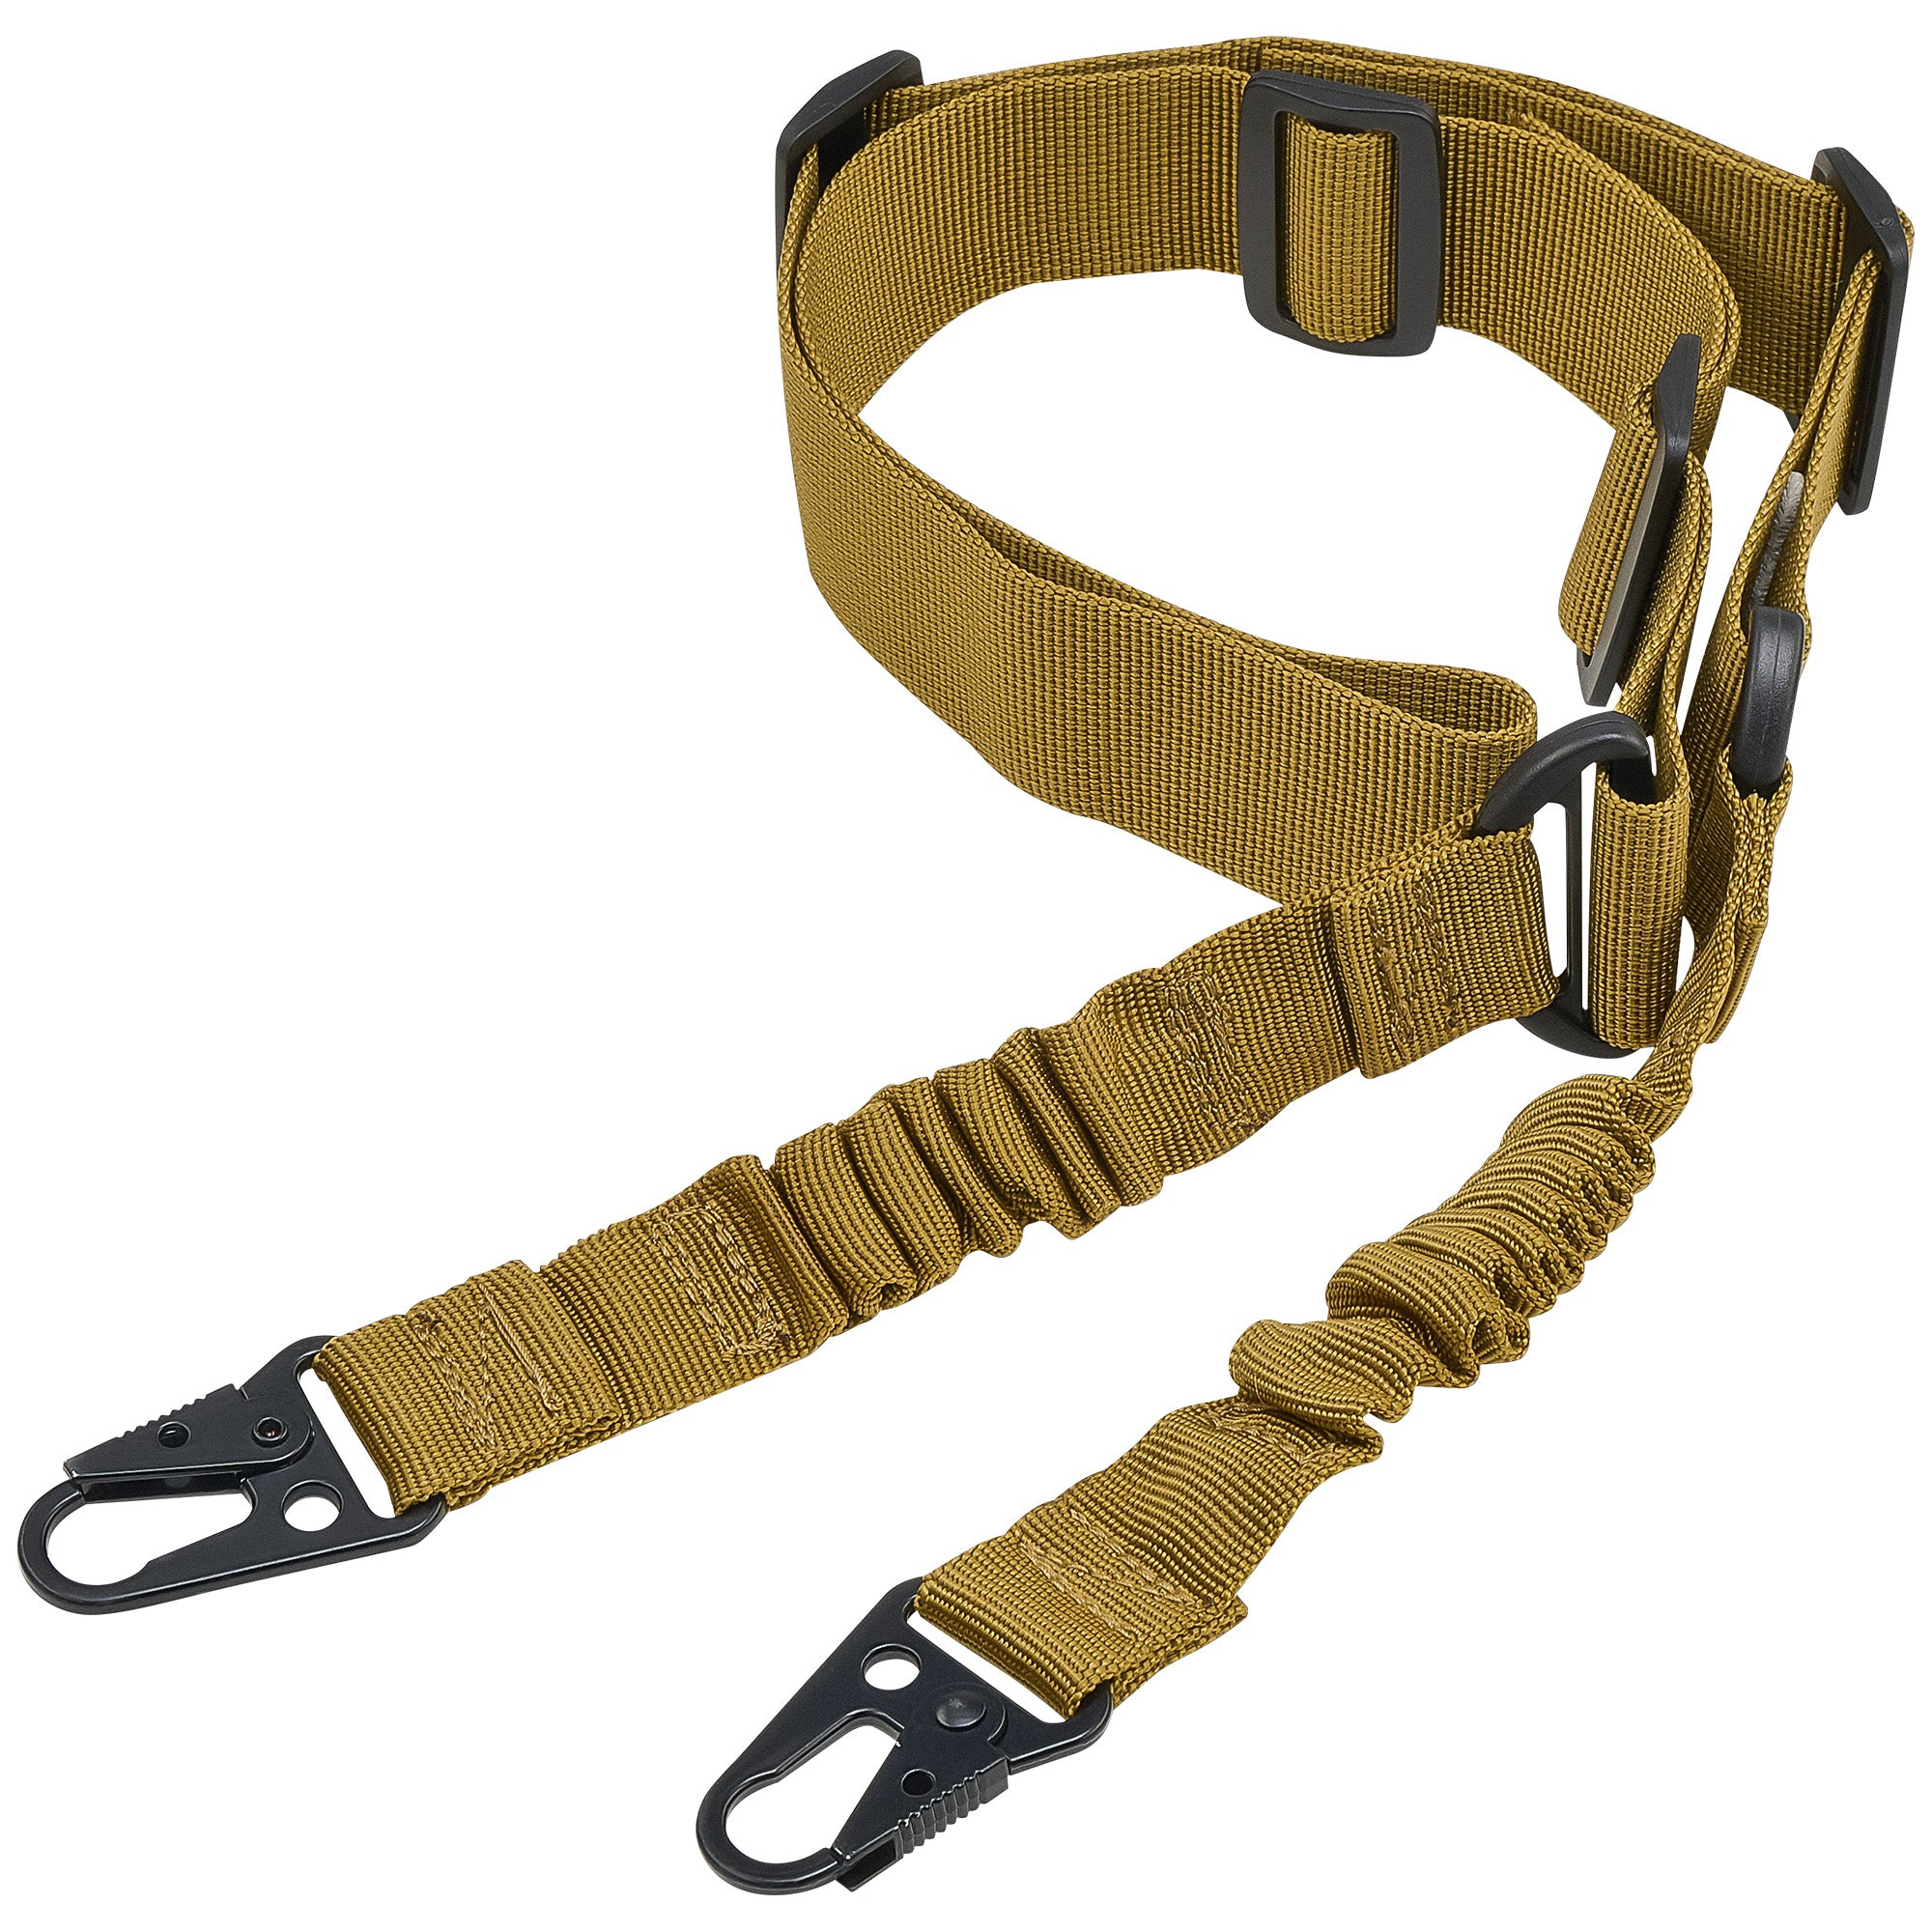 Two Point Rifle Sling, 62" Rifle Carry Strap with Adjustable Length